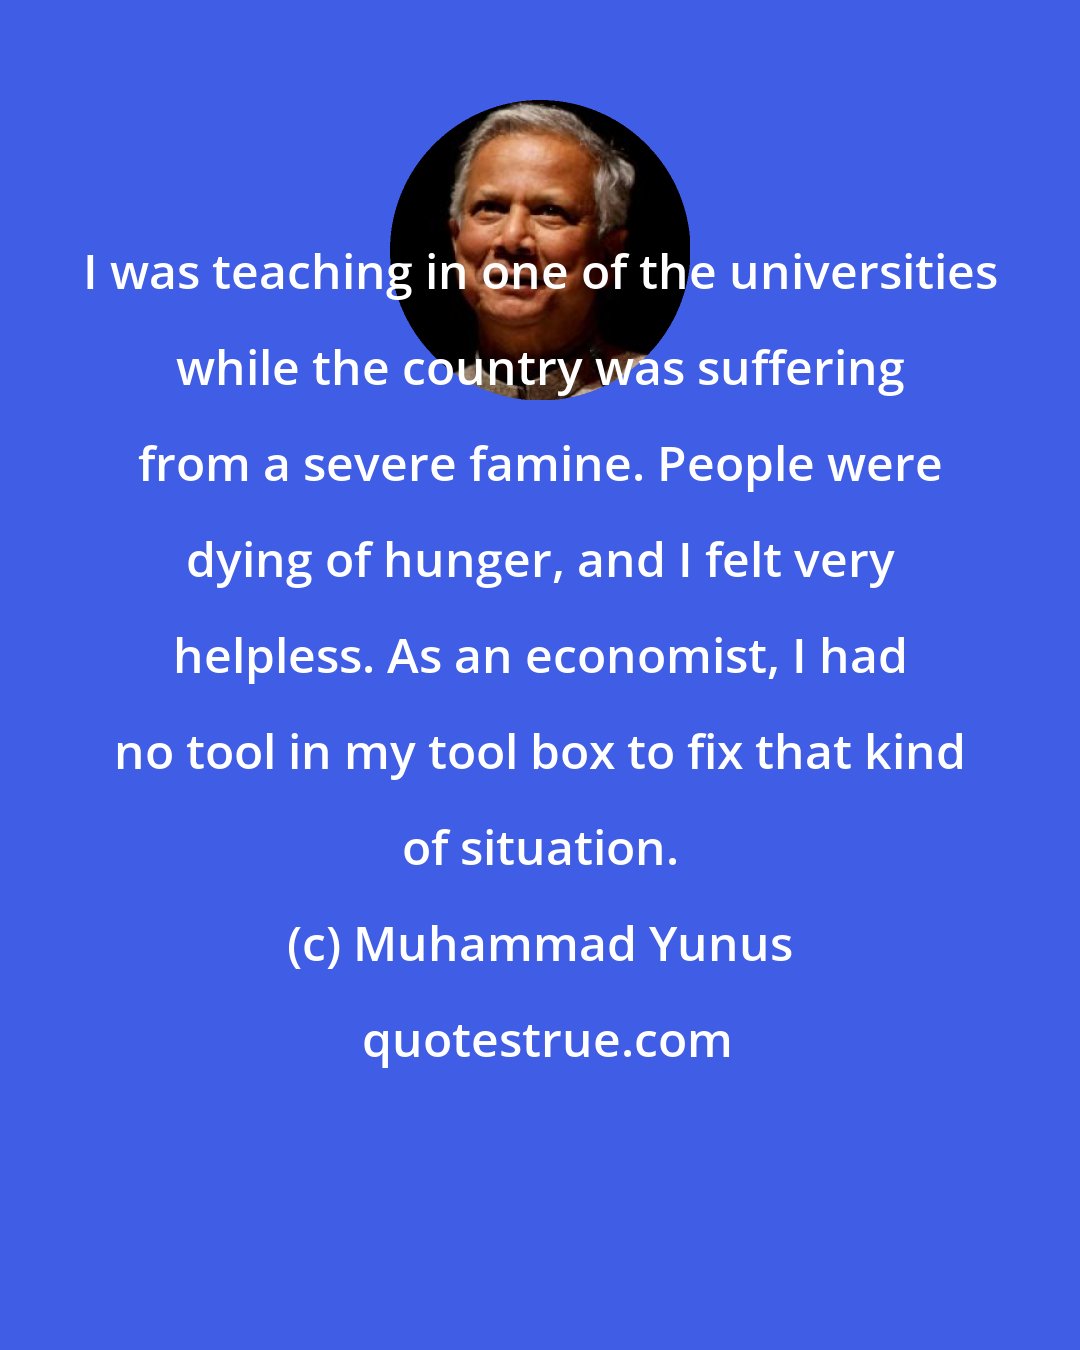 Muhammad Yunus: I was teaching in one of the universities while the country was suffering from a severe famine. People were dying of hunger, and I felt very helpless. As an economist, I had no tool in my tool box to fix that kind of situation.